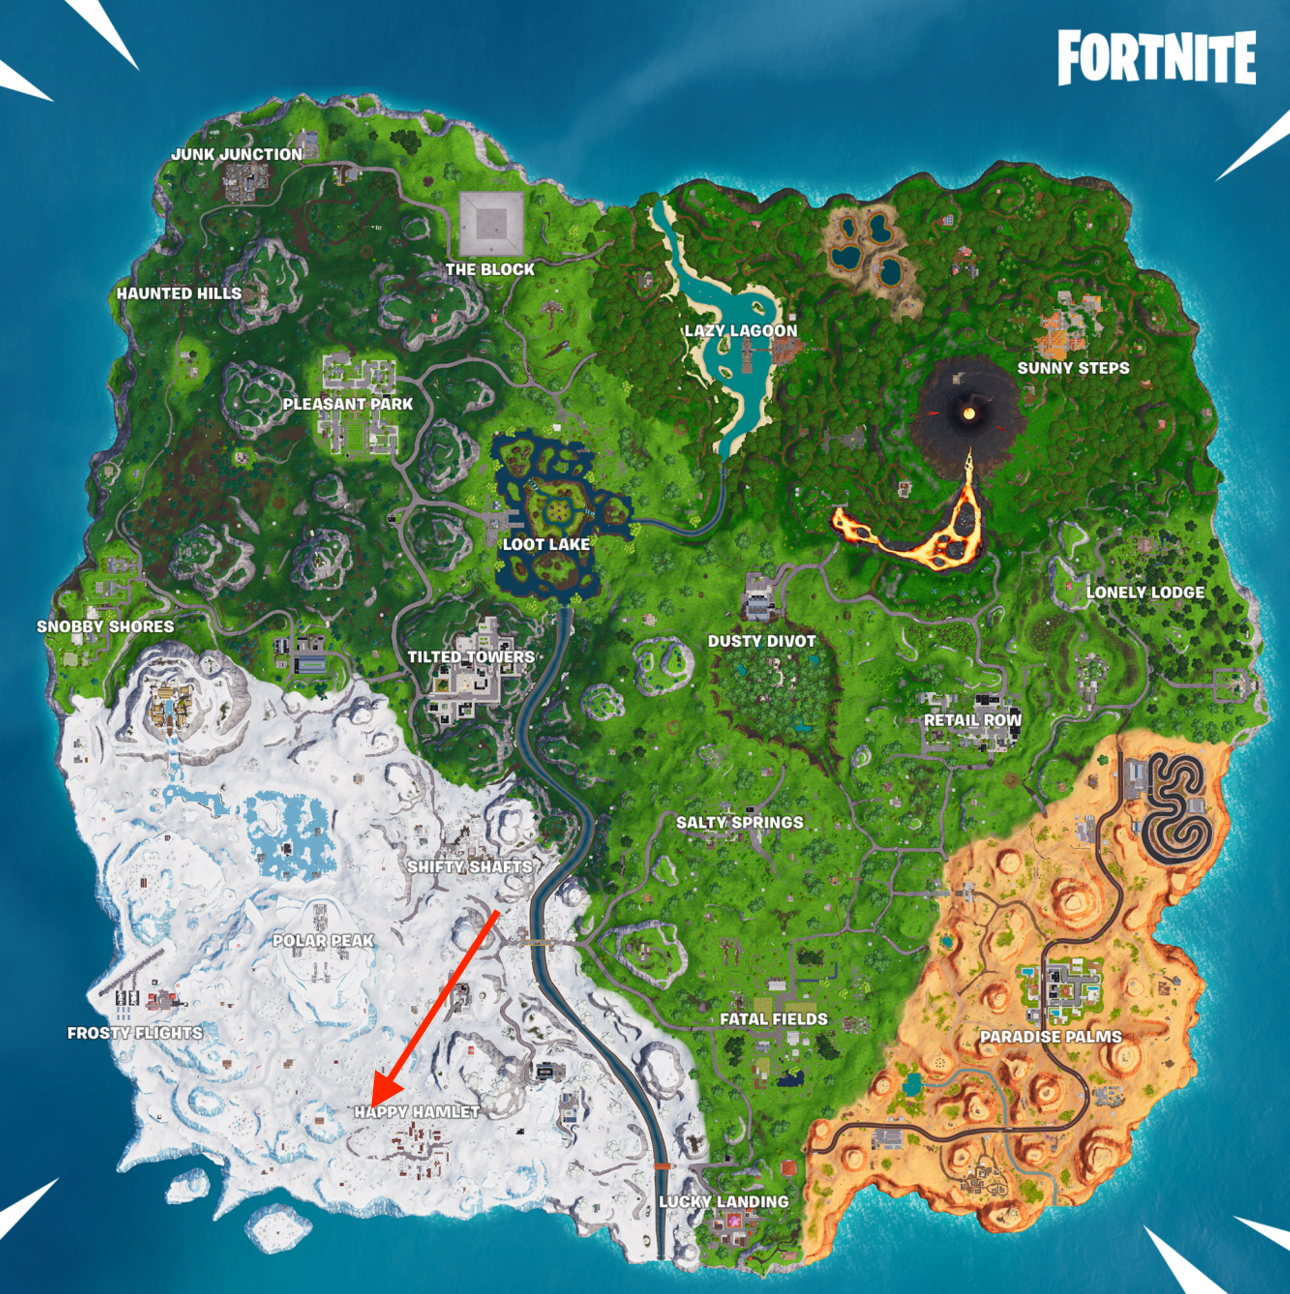 fortnite race track in happy hamlet location to complete a baller lap inverse - baller race track fortnite code